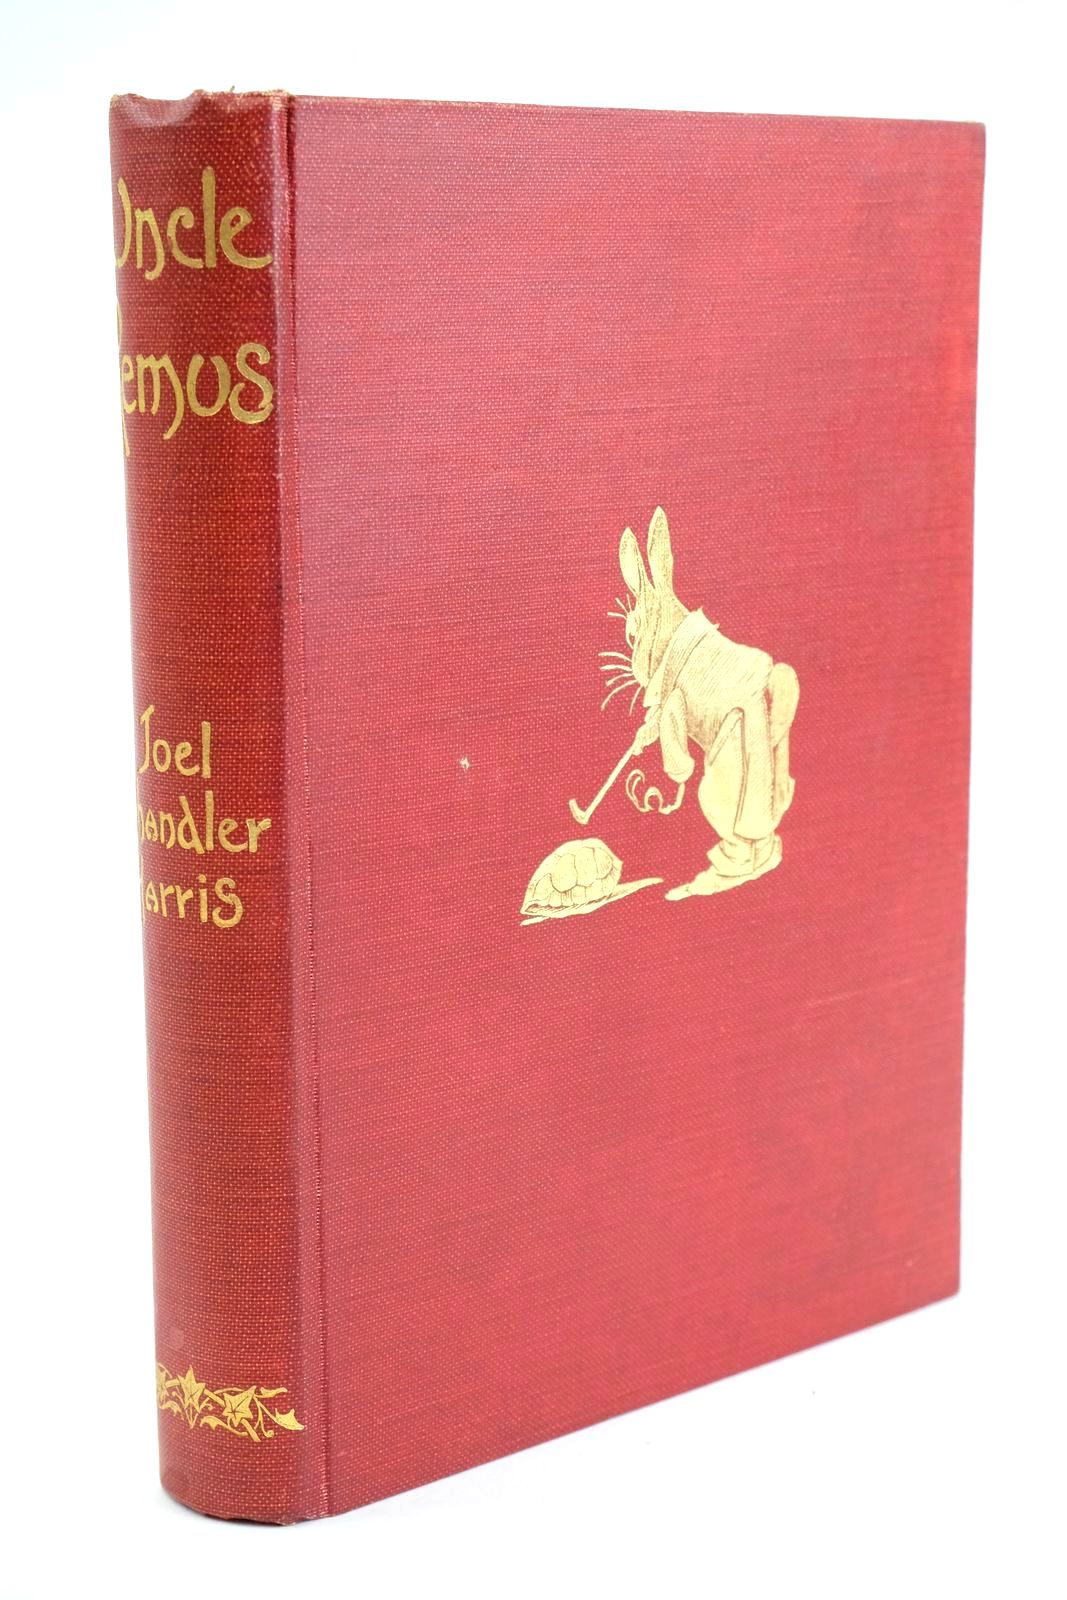 Photo of UNCLE REMUS written by Harris, Joel Chandler illustrated by Shepherd, J.A. published by Chatto &amp; Windus (STOCK CODE: 1323721)  for sale by Stella & Rose's Books